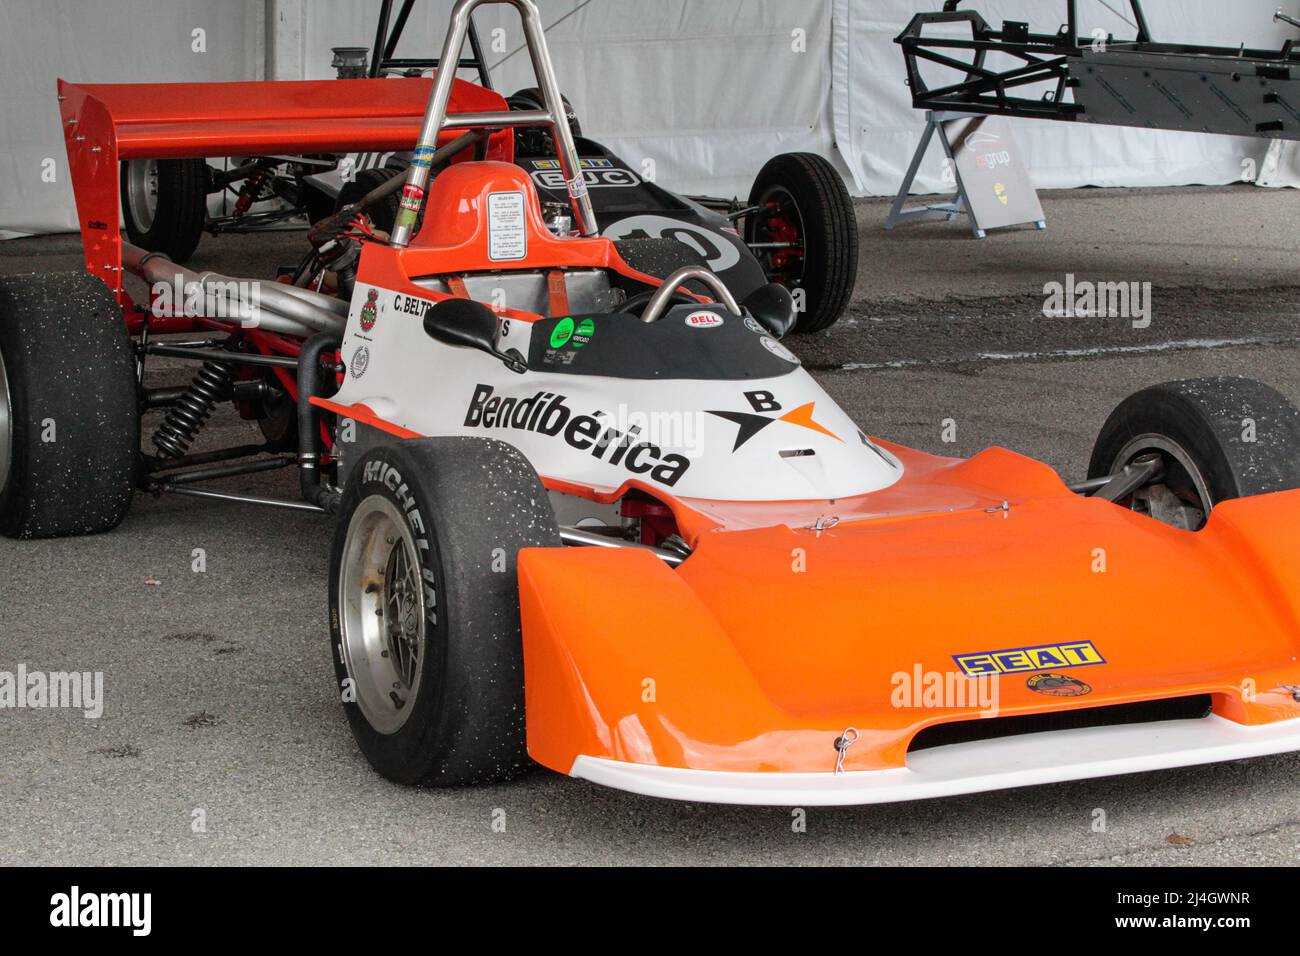 1974 Selex ST4 racing car driven by Carlos Beltran that competed in the Formula Seat 1800 championship in Spain in the 1970s Stock Photo